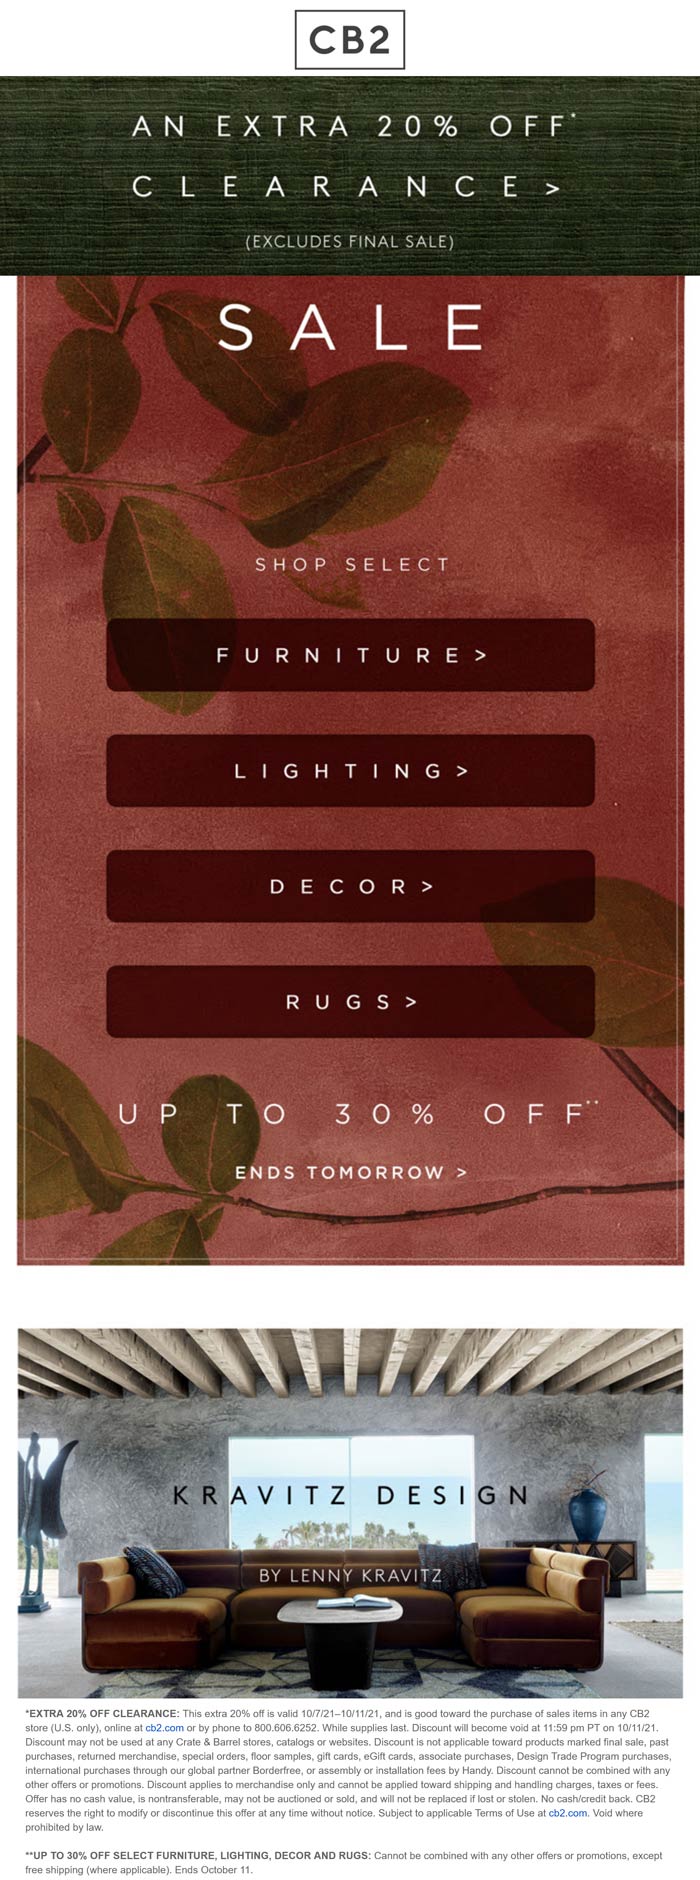 CB2 stores Coupon  Extra 20% off clearance & more at CB2, ditto online #cb2 